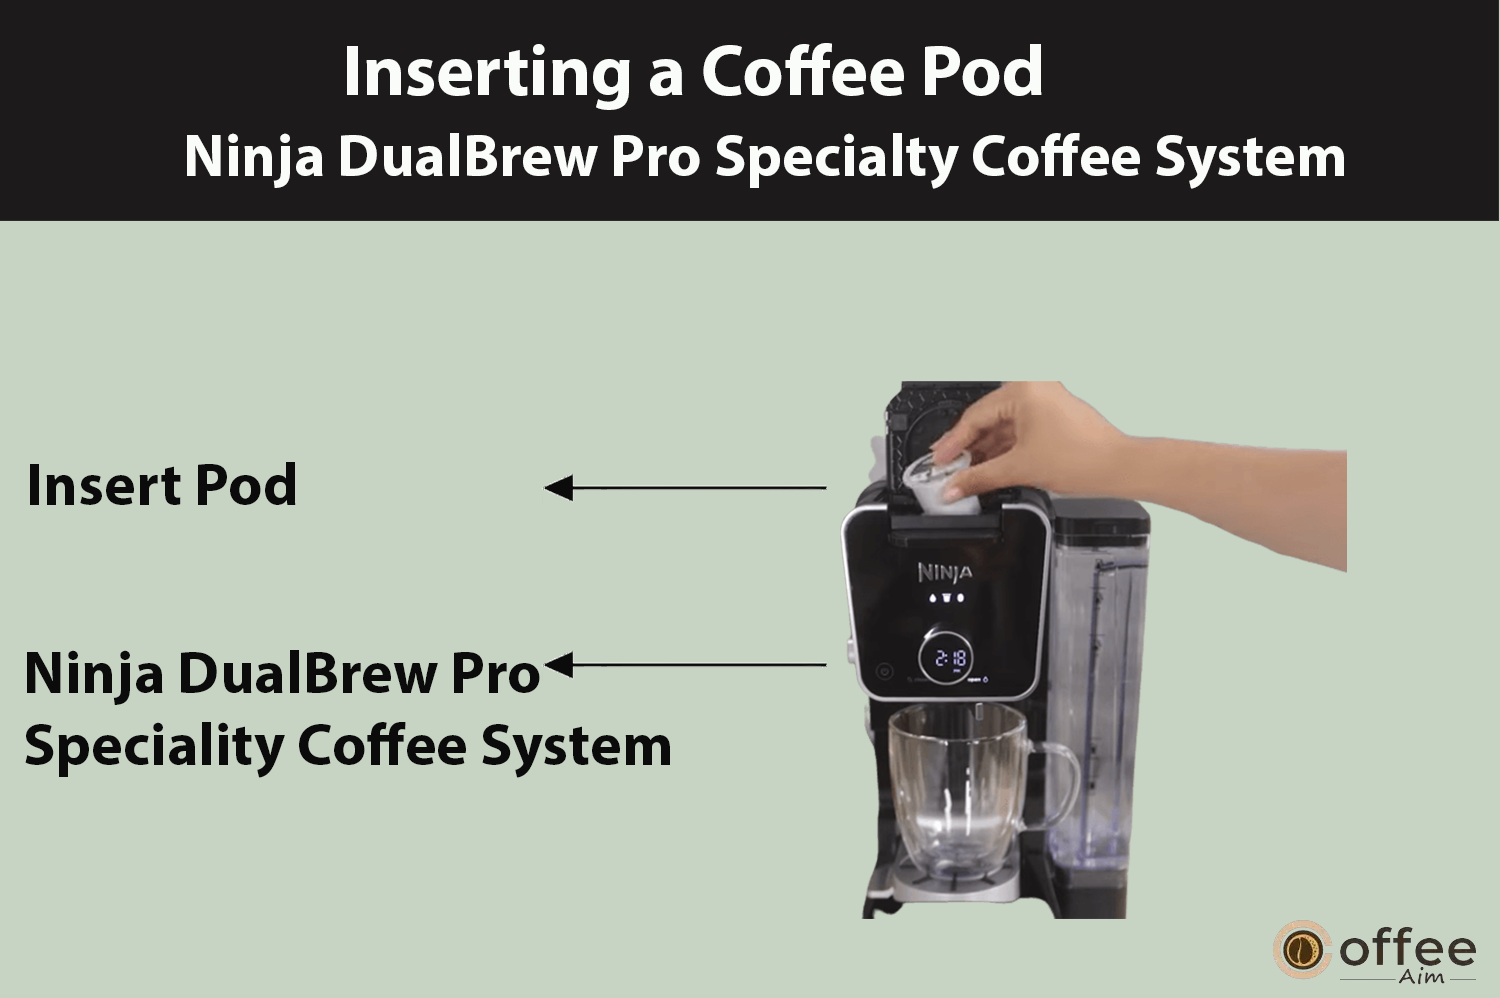 "This image showcases the insertion of a coffee pod into the Ninja DualBrew Pro Specialty Coffee System, as featured in the article 'How to Use Ninja DualBrew Pro Specialty Coffee System, Compatible with K-Cup Pods, and 12-Cup Drip Coffee Maker'."